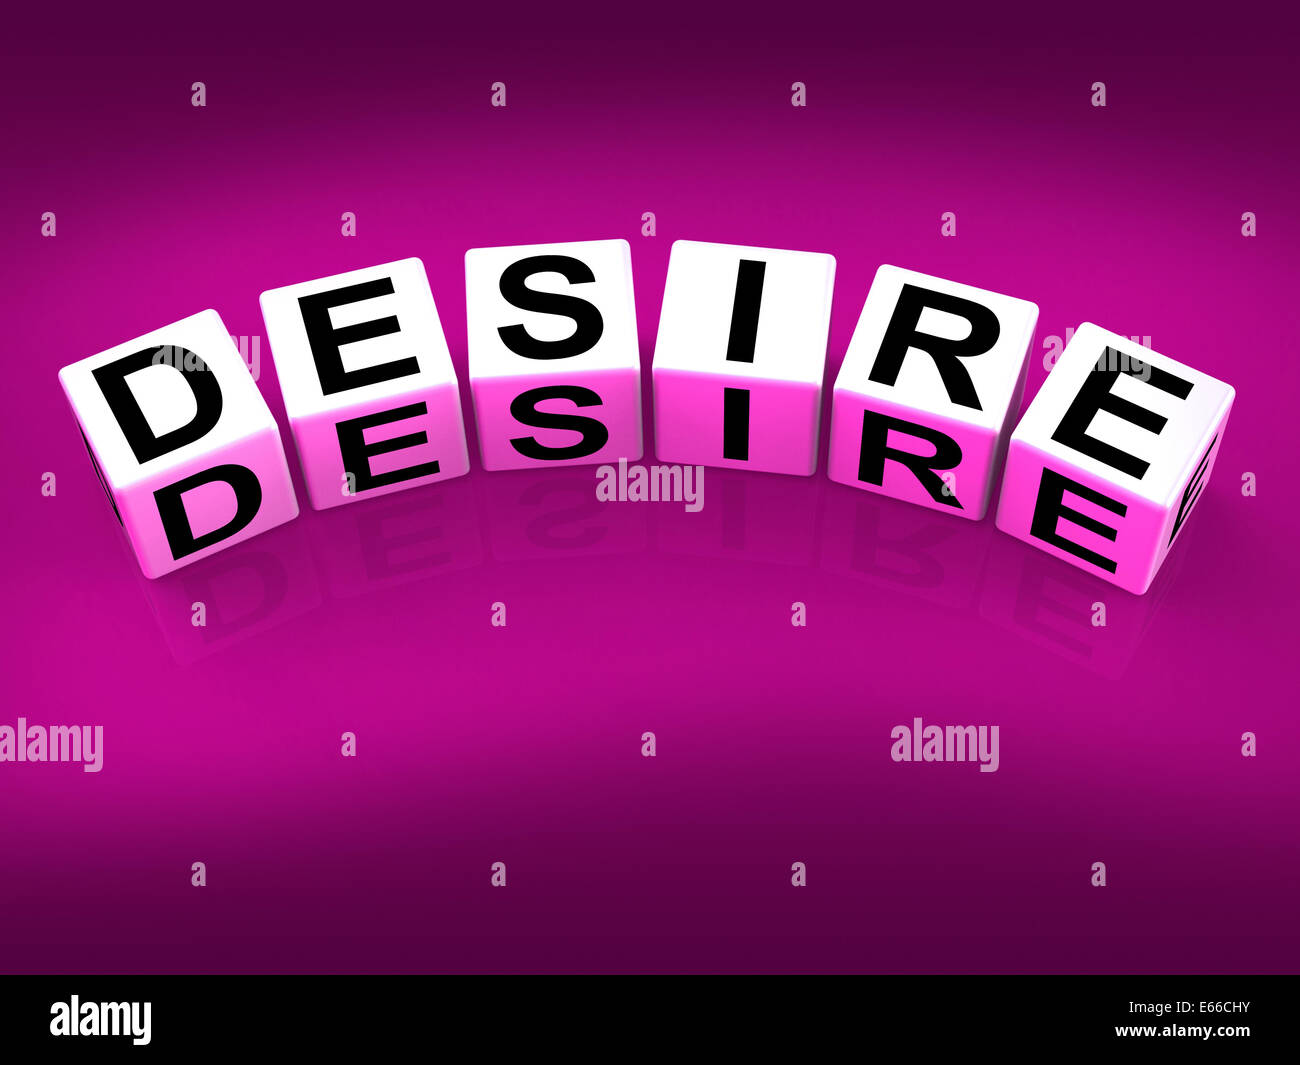 Desire Blocks Showing Desires Ambitions and Motivation Stock Photo